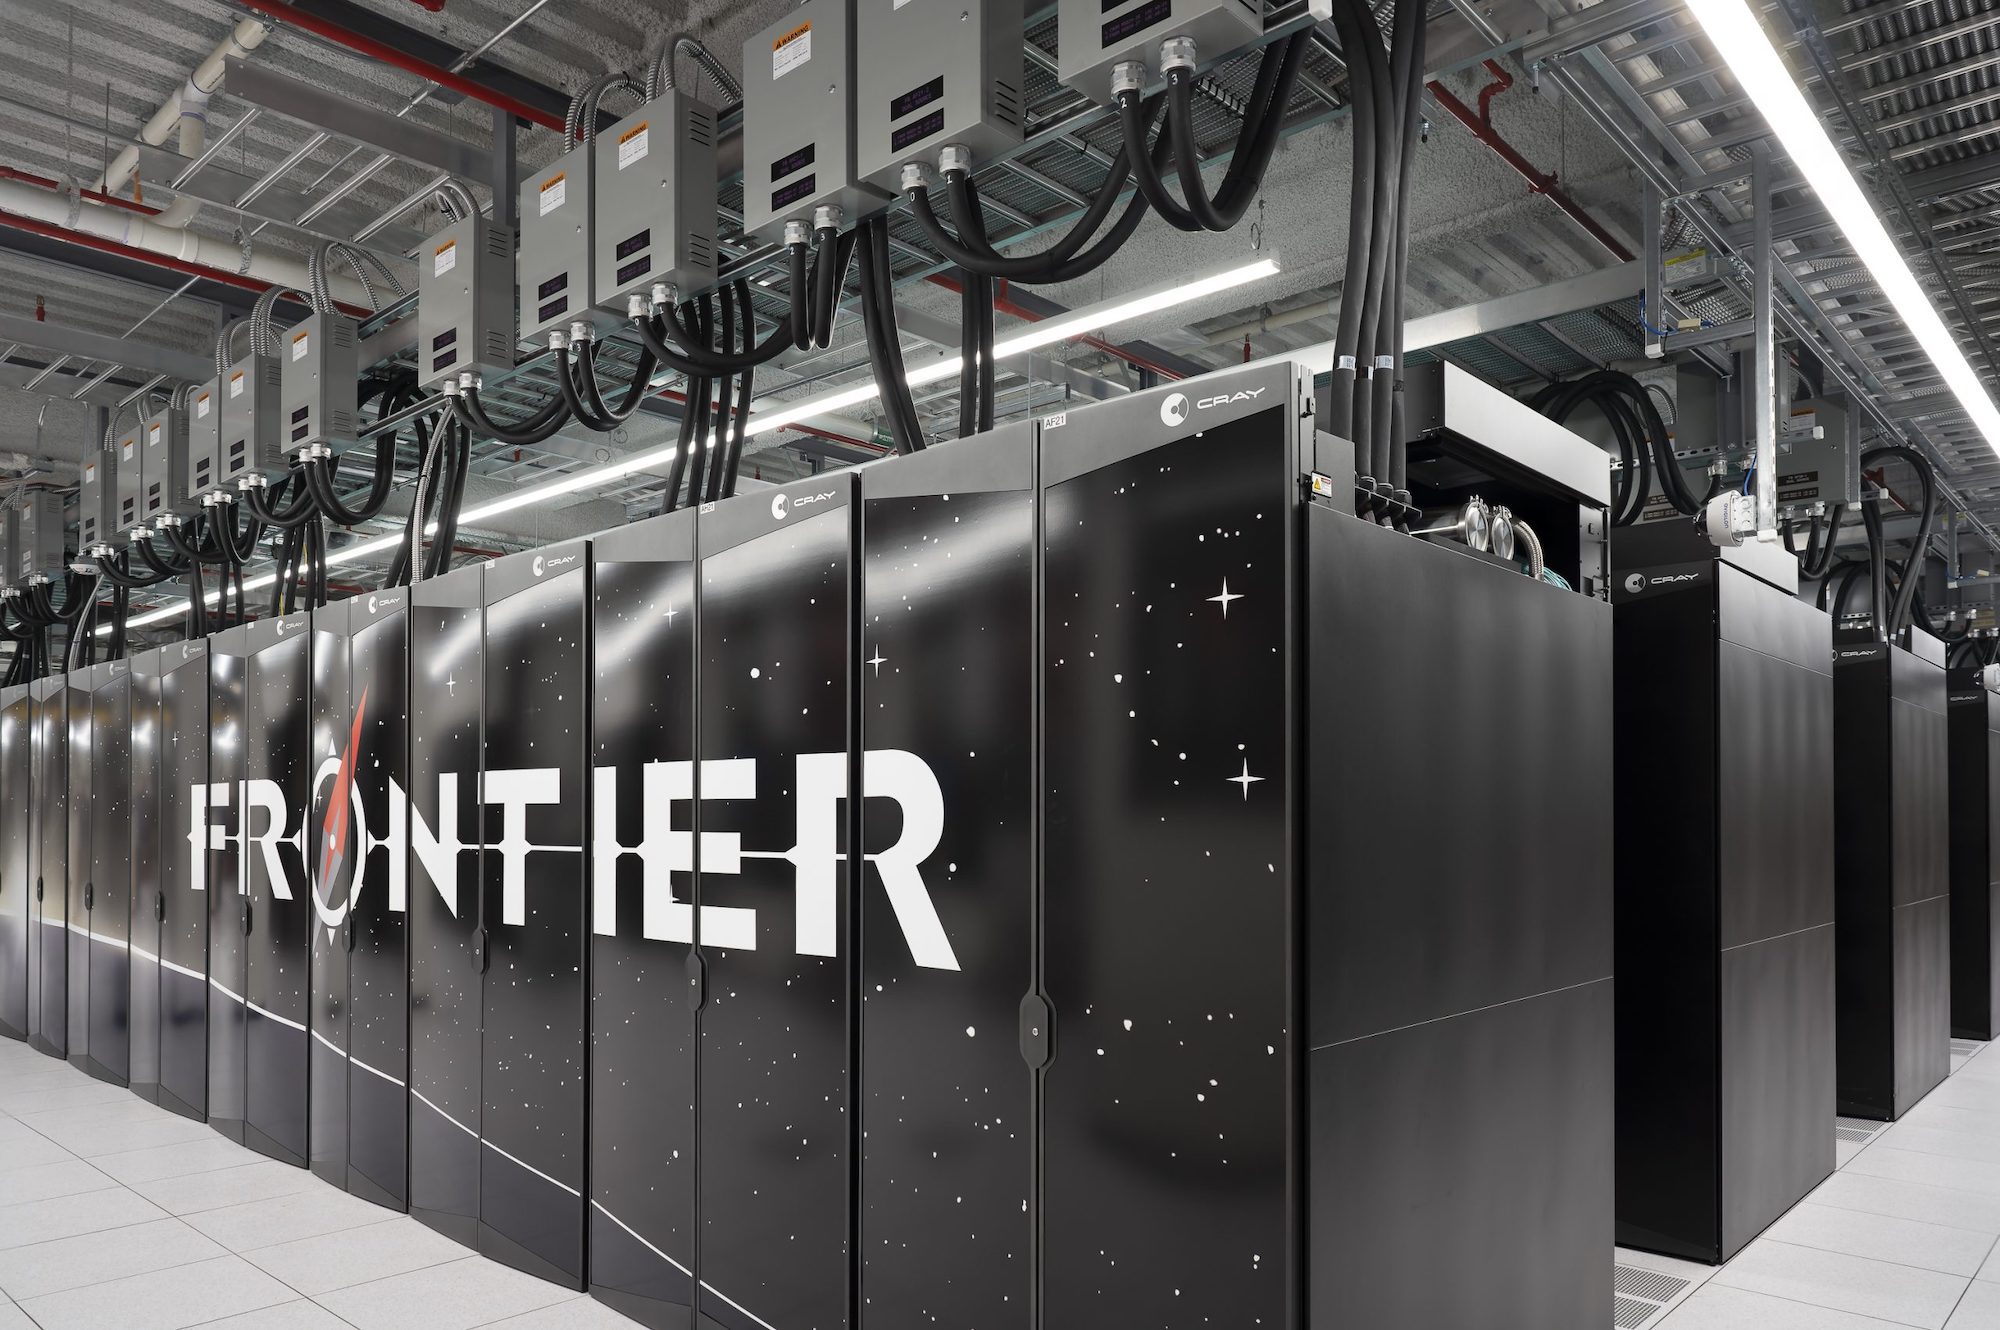 The world's highest-performing supercomputer: The Frontier. Media sourced from ORNL.